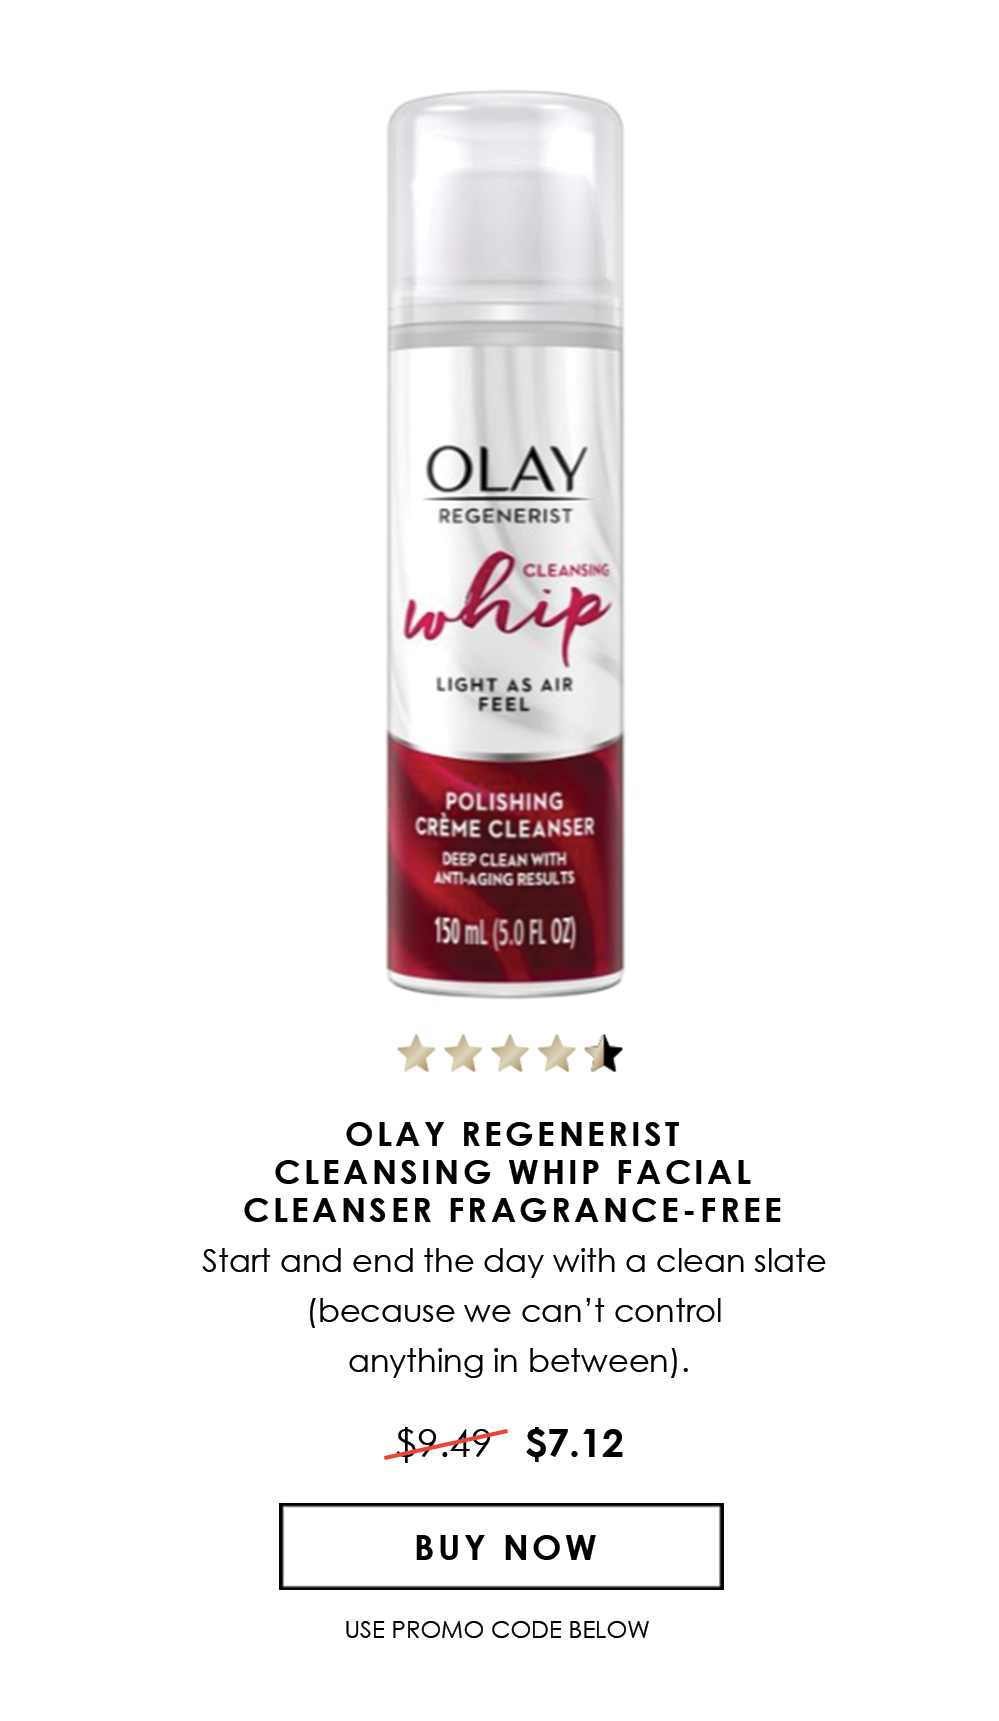 25% Off Regenerist Cleansing Whip Facial Cleanser Fragrance-Free